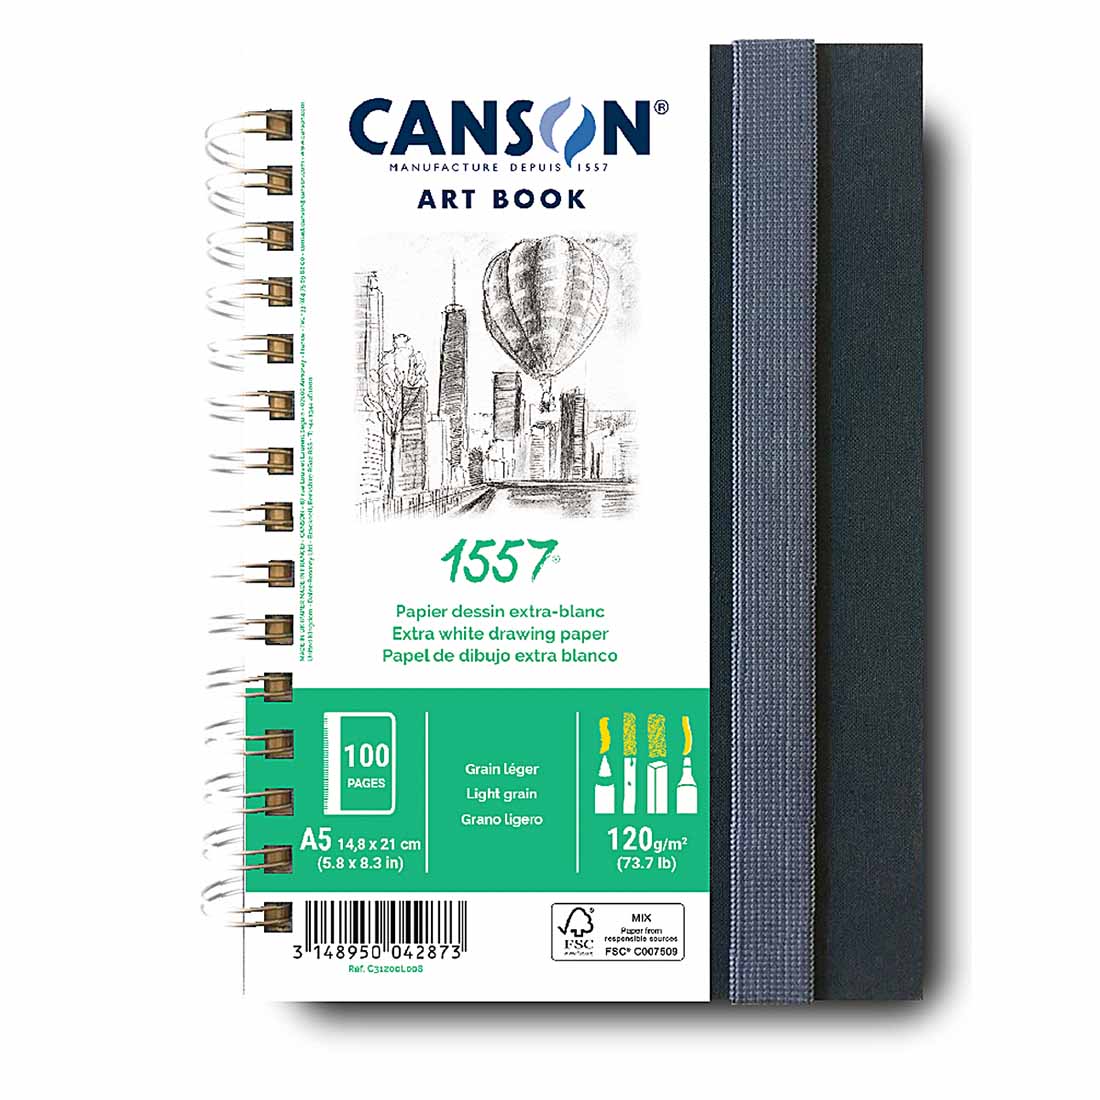 Canson 1557 Sketch Art Book 5.8x8.3, 100 Pages